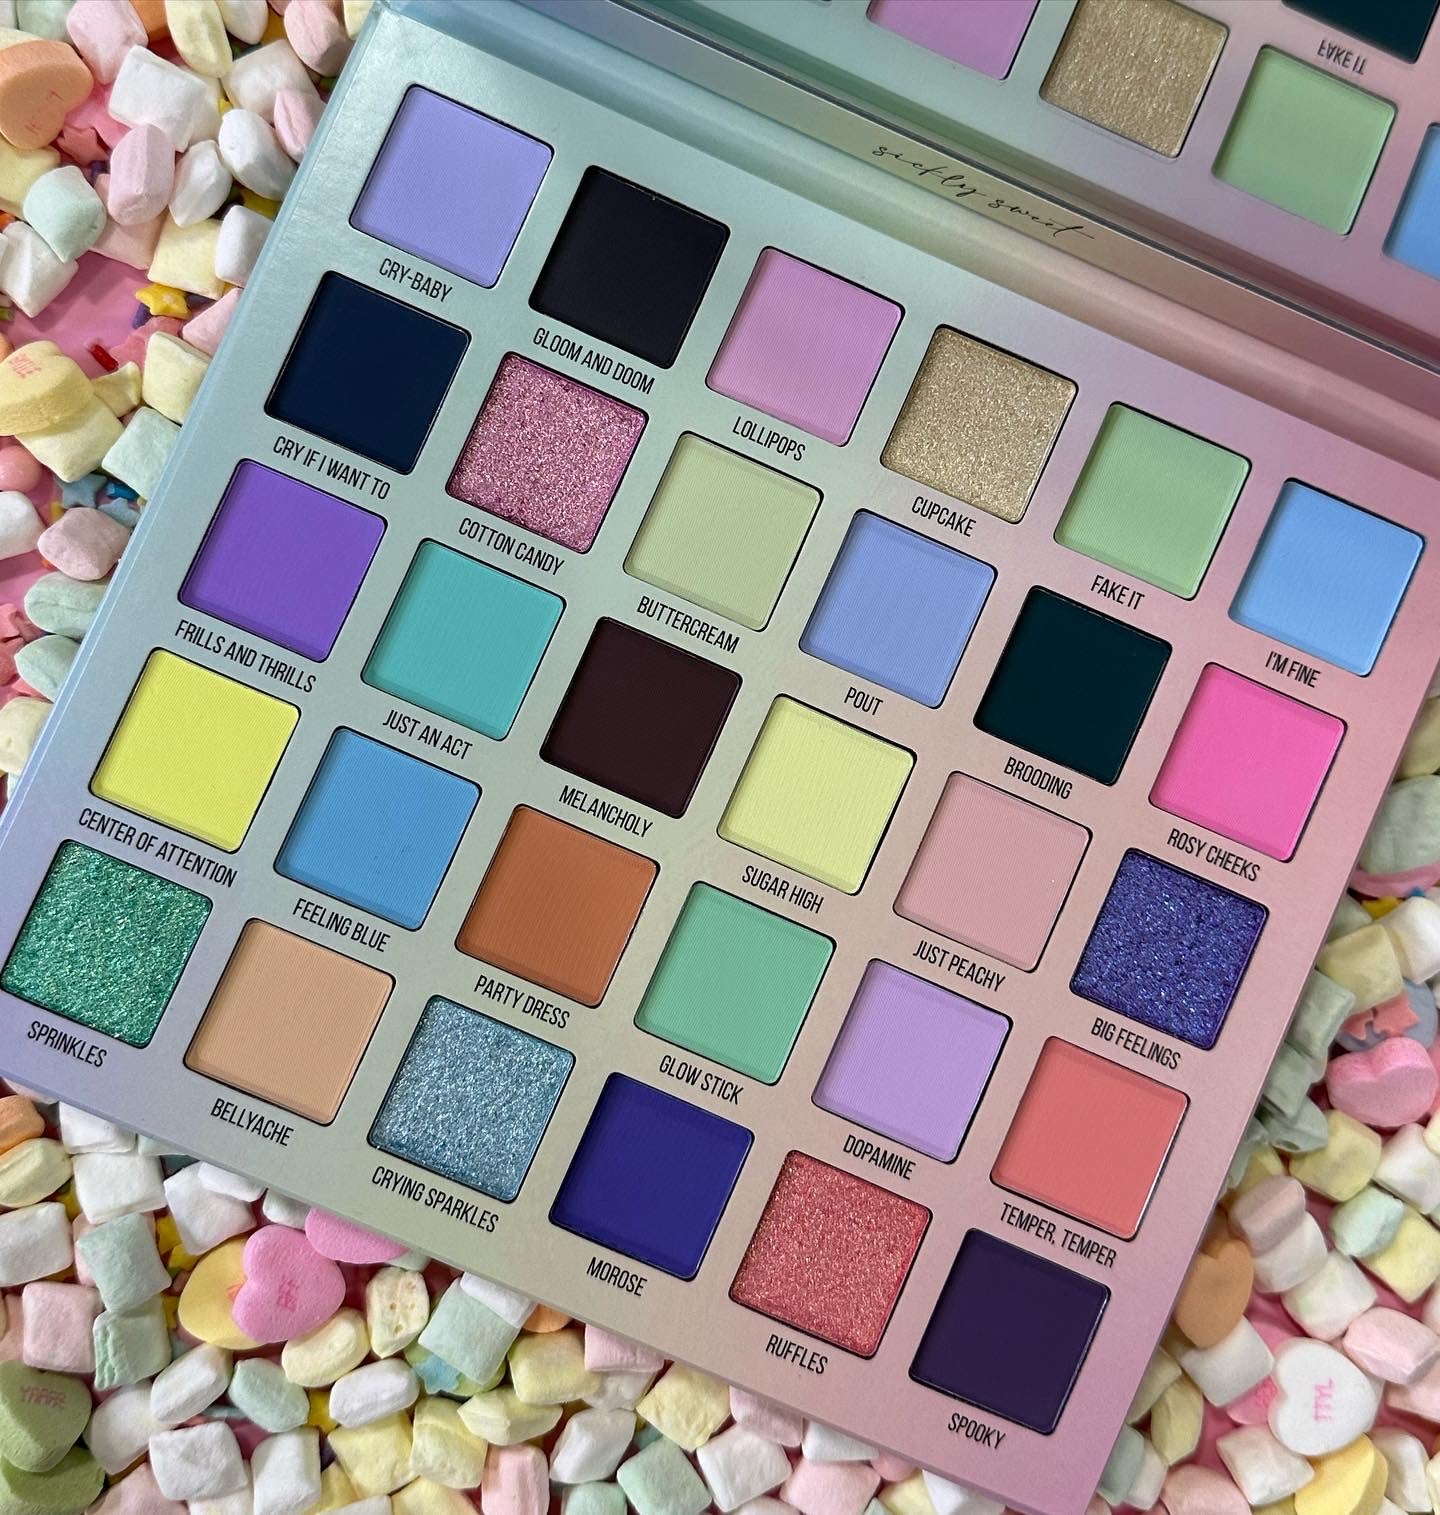 Sickly Sweet Palette